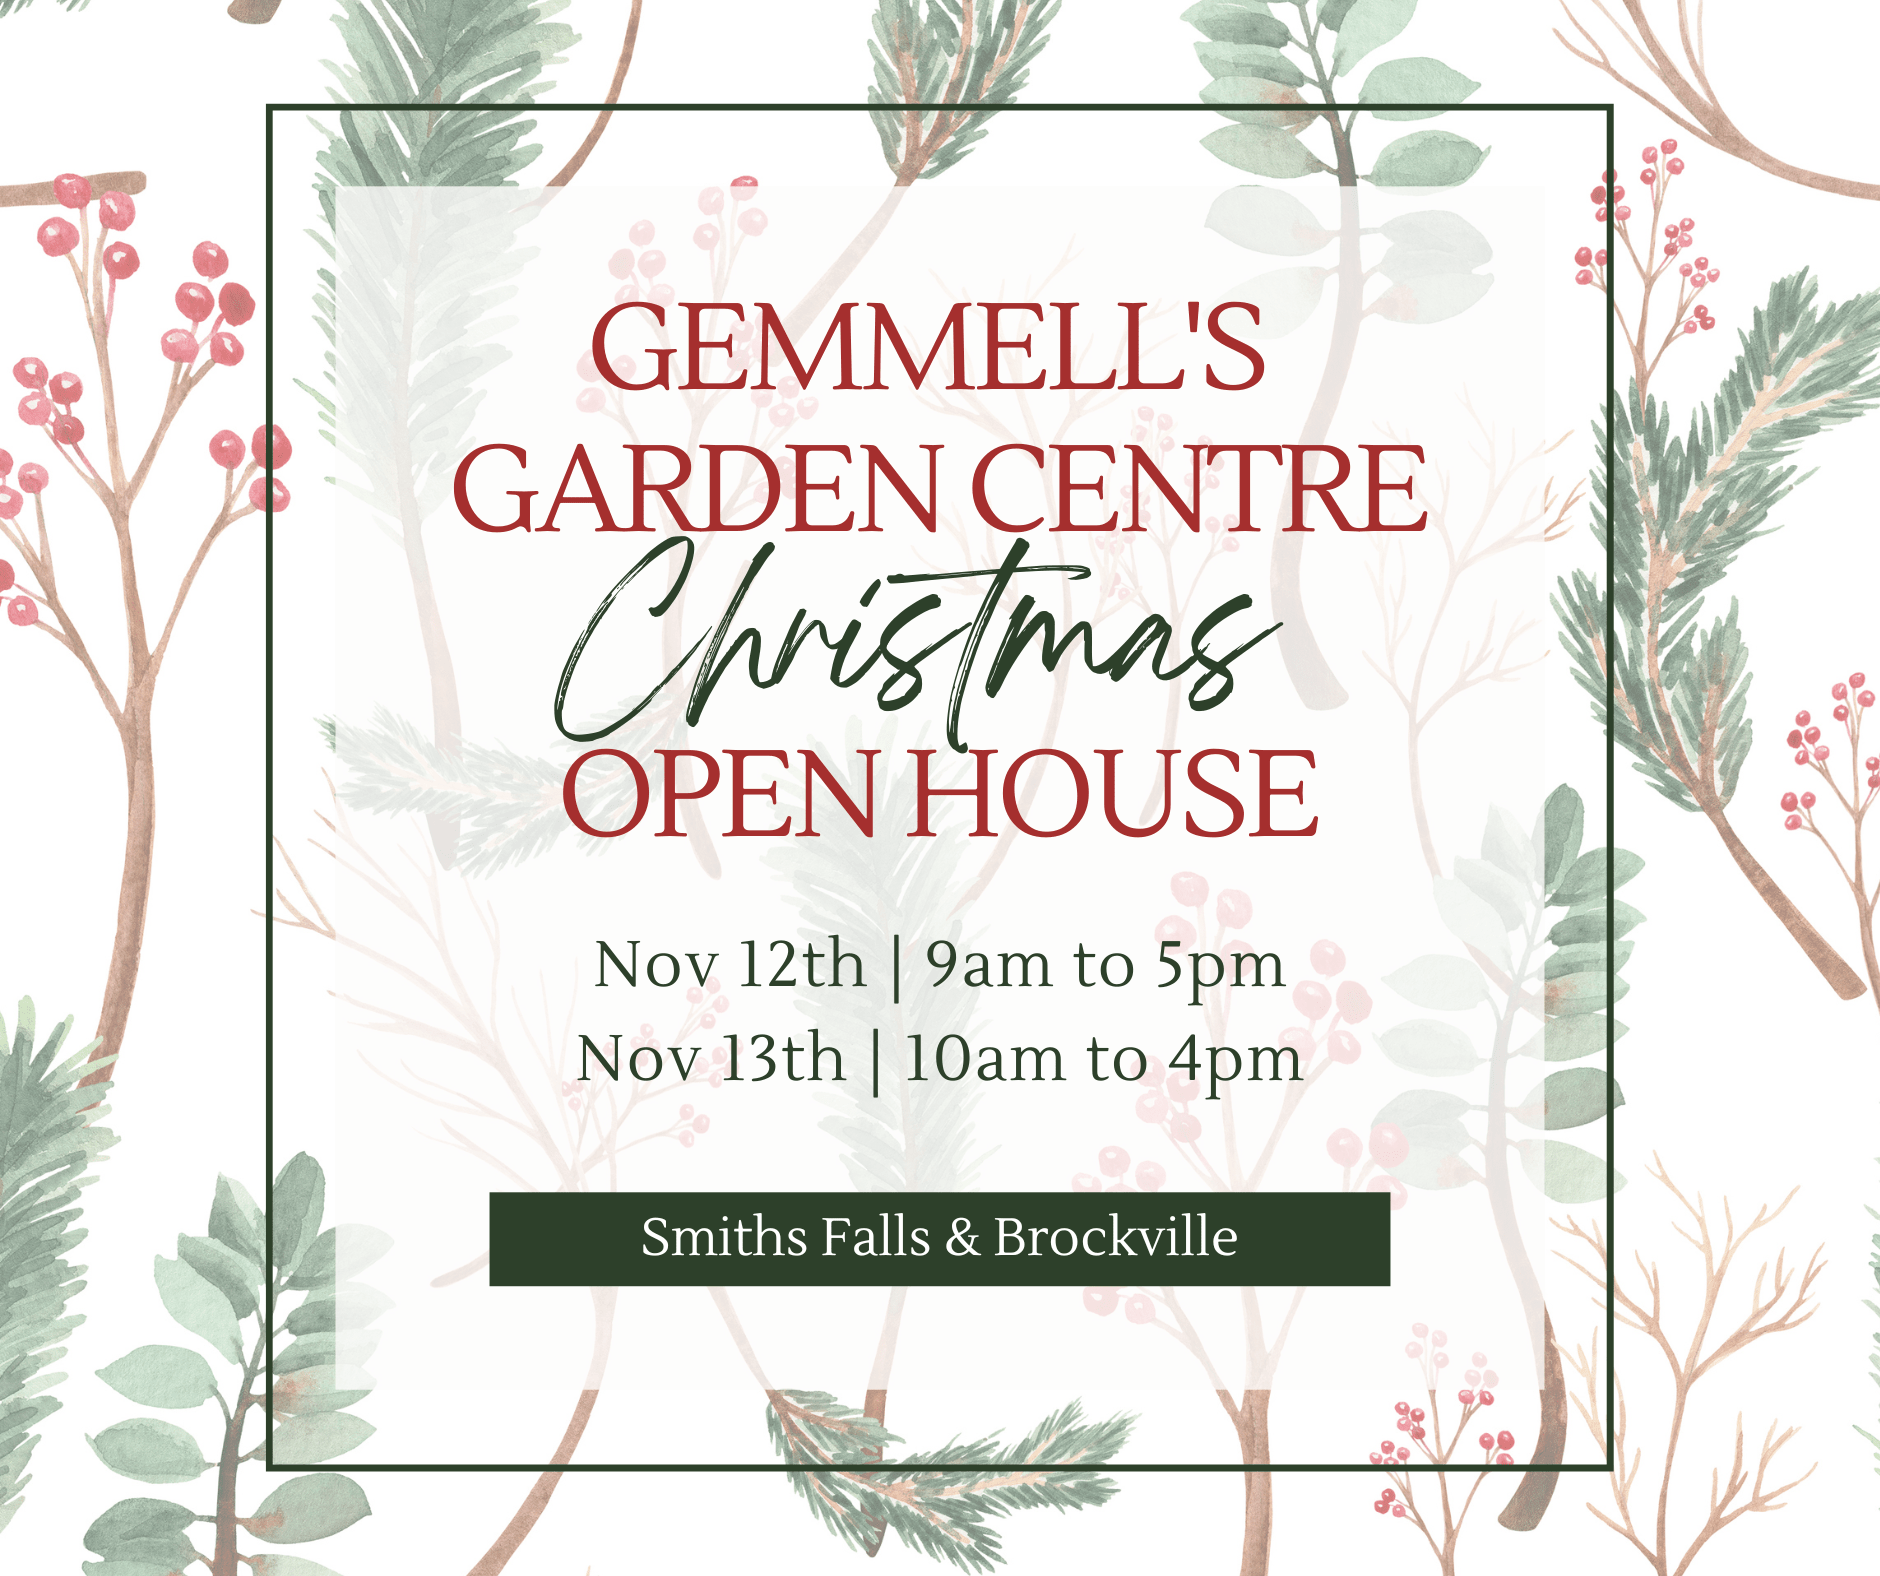 November 12 and 13 Gemmell's Christmas Open House Weekend Preview our Christmas & Holiday Collection at both our Brockville & Smiths Falls Locations.